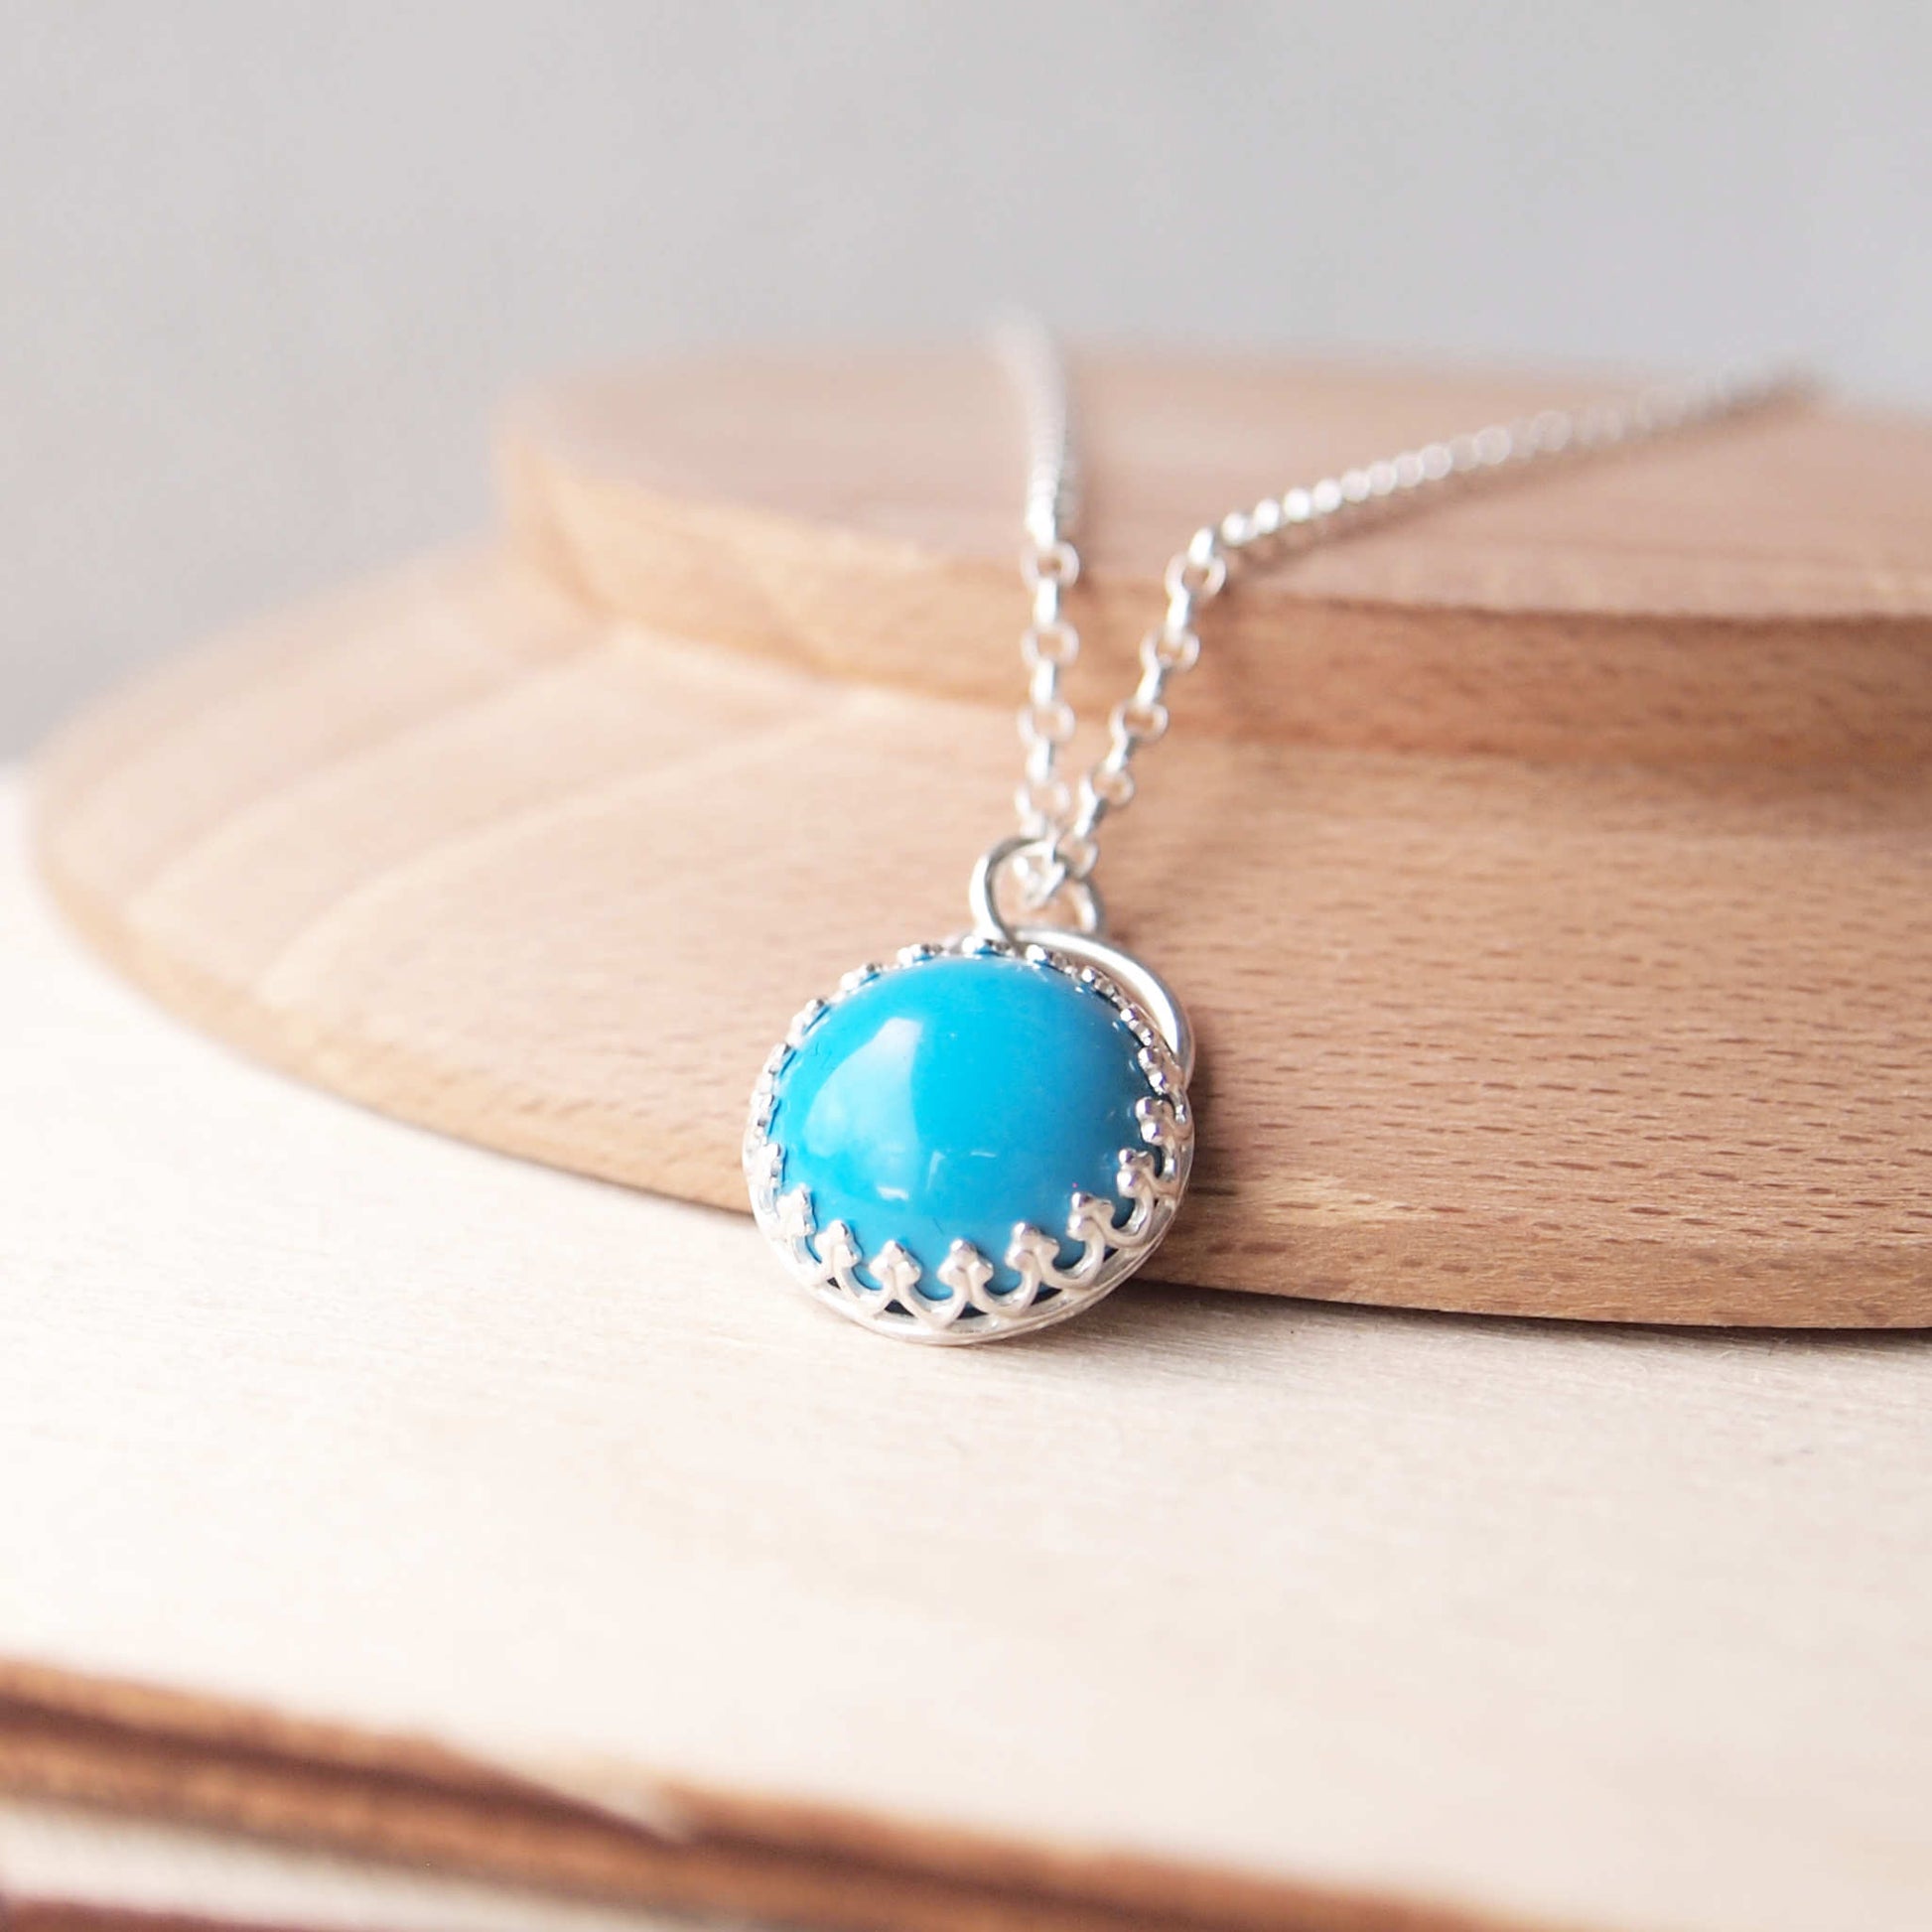 Turquoise gemstone necklace, simple style with a lacy filigree edge to the setting. Made from Sterling Silver and a 10mm sized round cabochon stone and supplied with a chain in a choice of lengths. Handmade by maram jewellery, an independant jeweller and designer working in Edinburgh, Scotland, UK